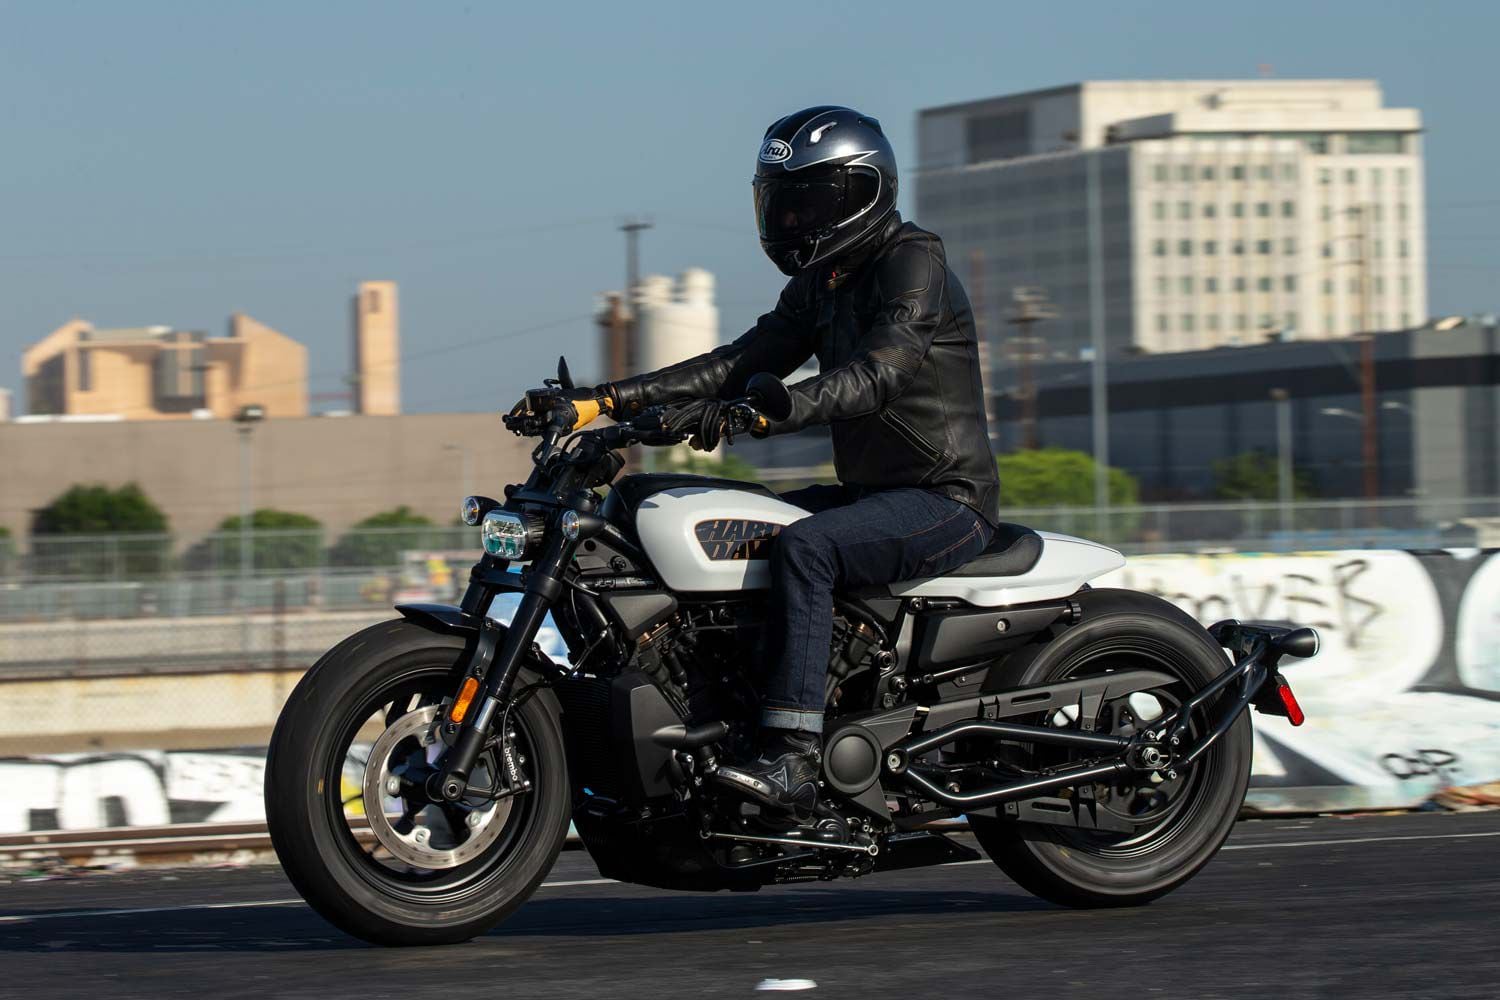 2021 Harley-Davidson Sportster S first ride review - RevZilla